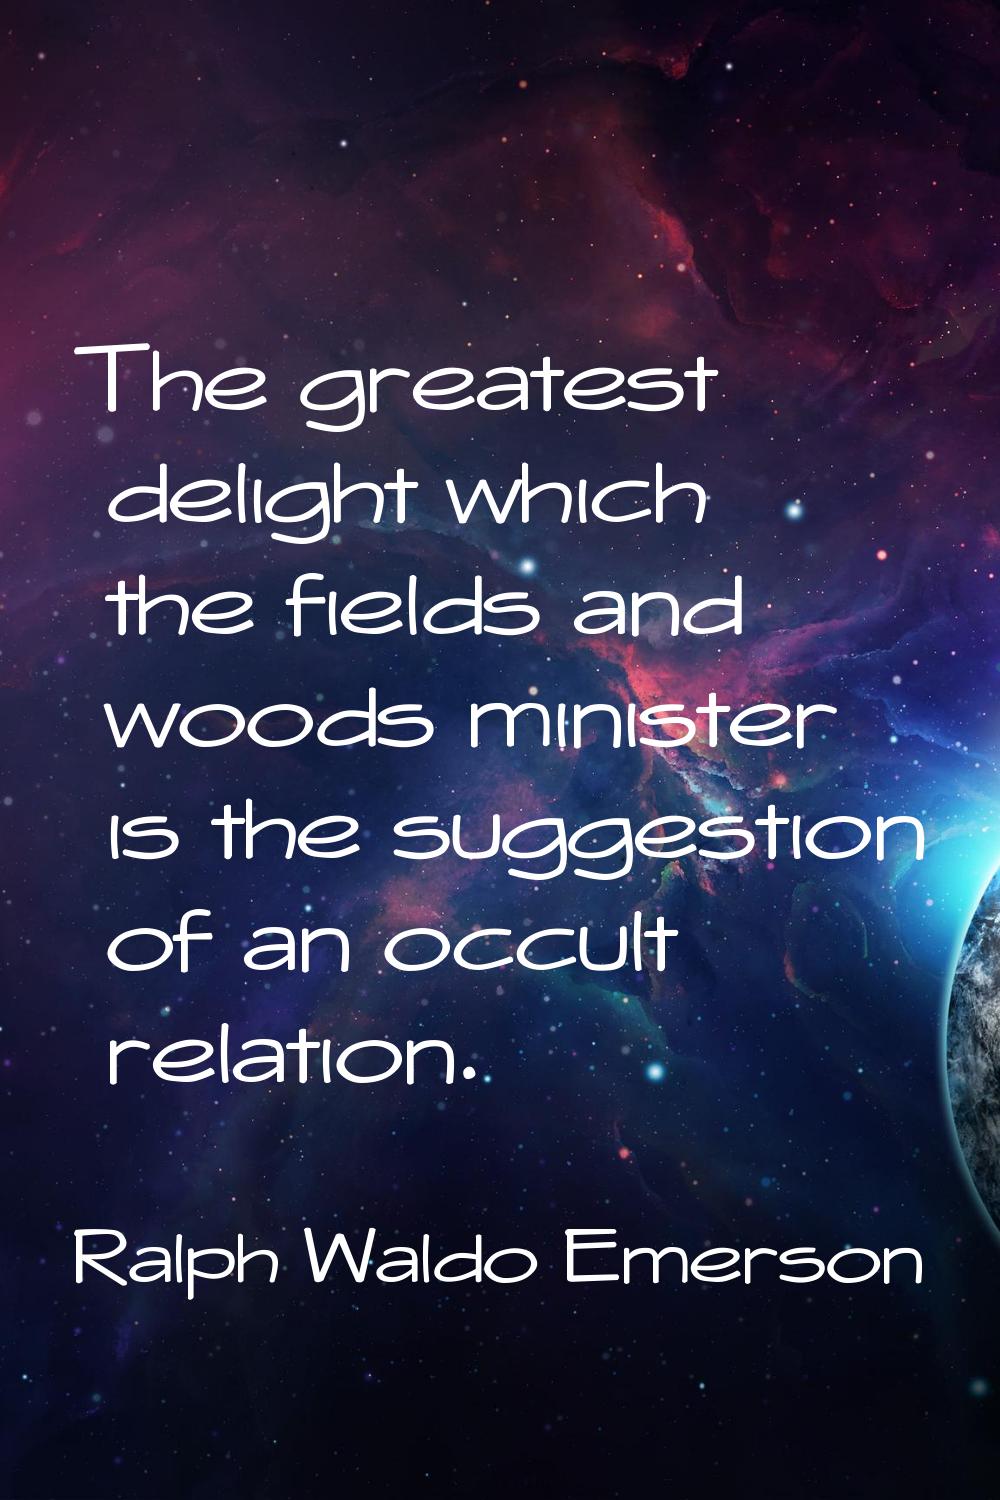 The greatest delight which the fields and woods minister is the suggestion of an occult relation.